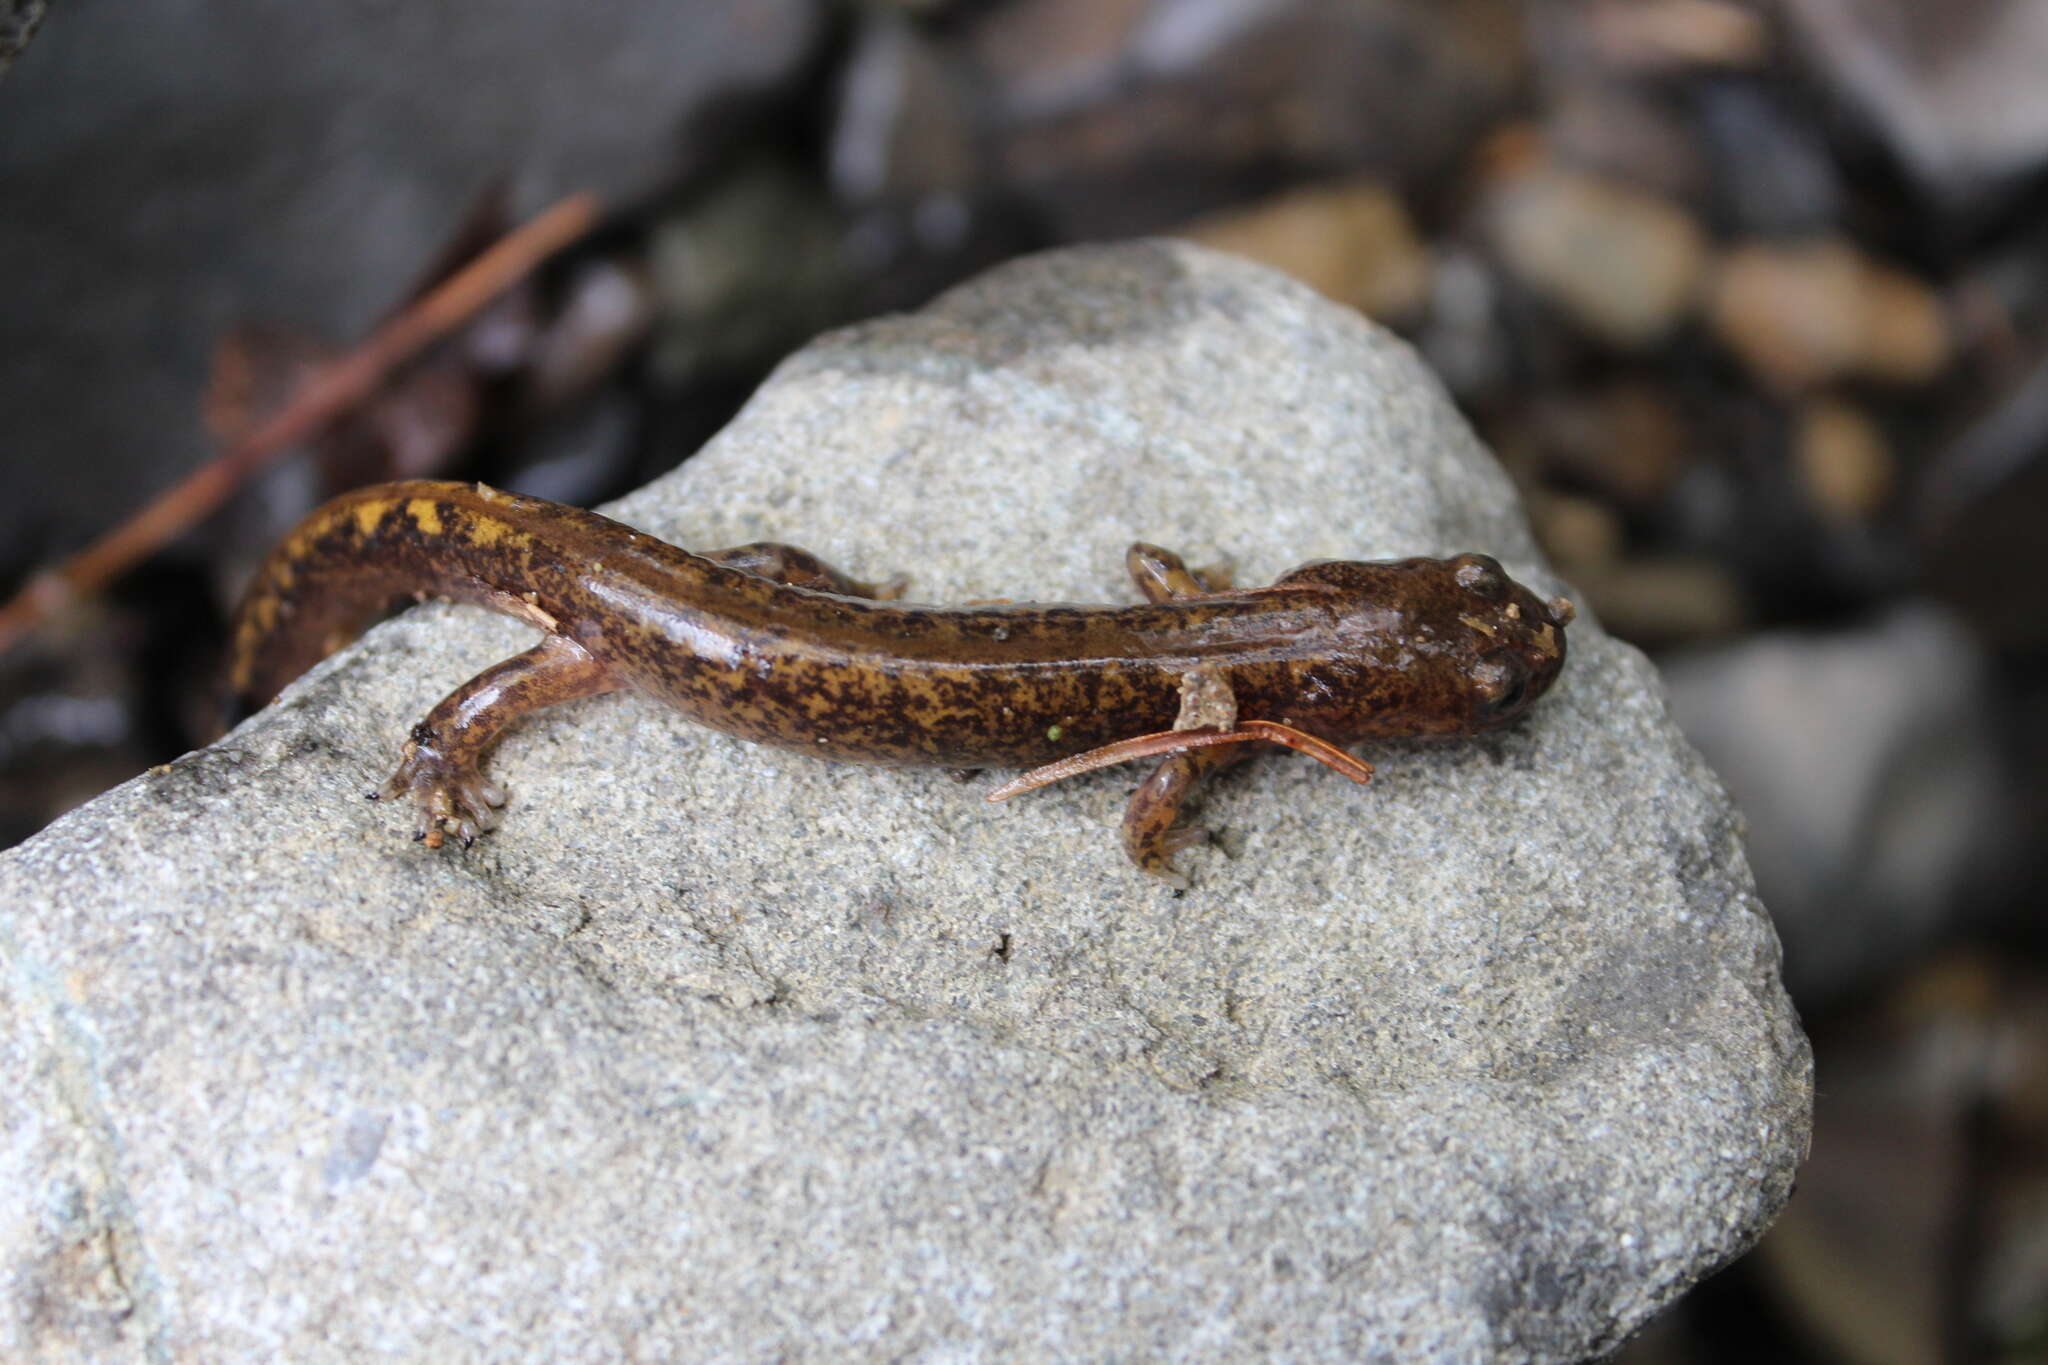 Image of Long-tailed clawed salamander